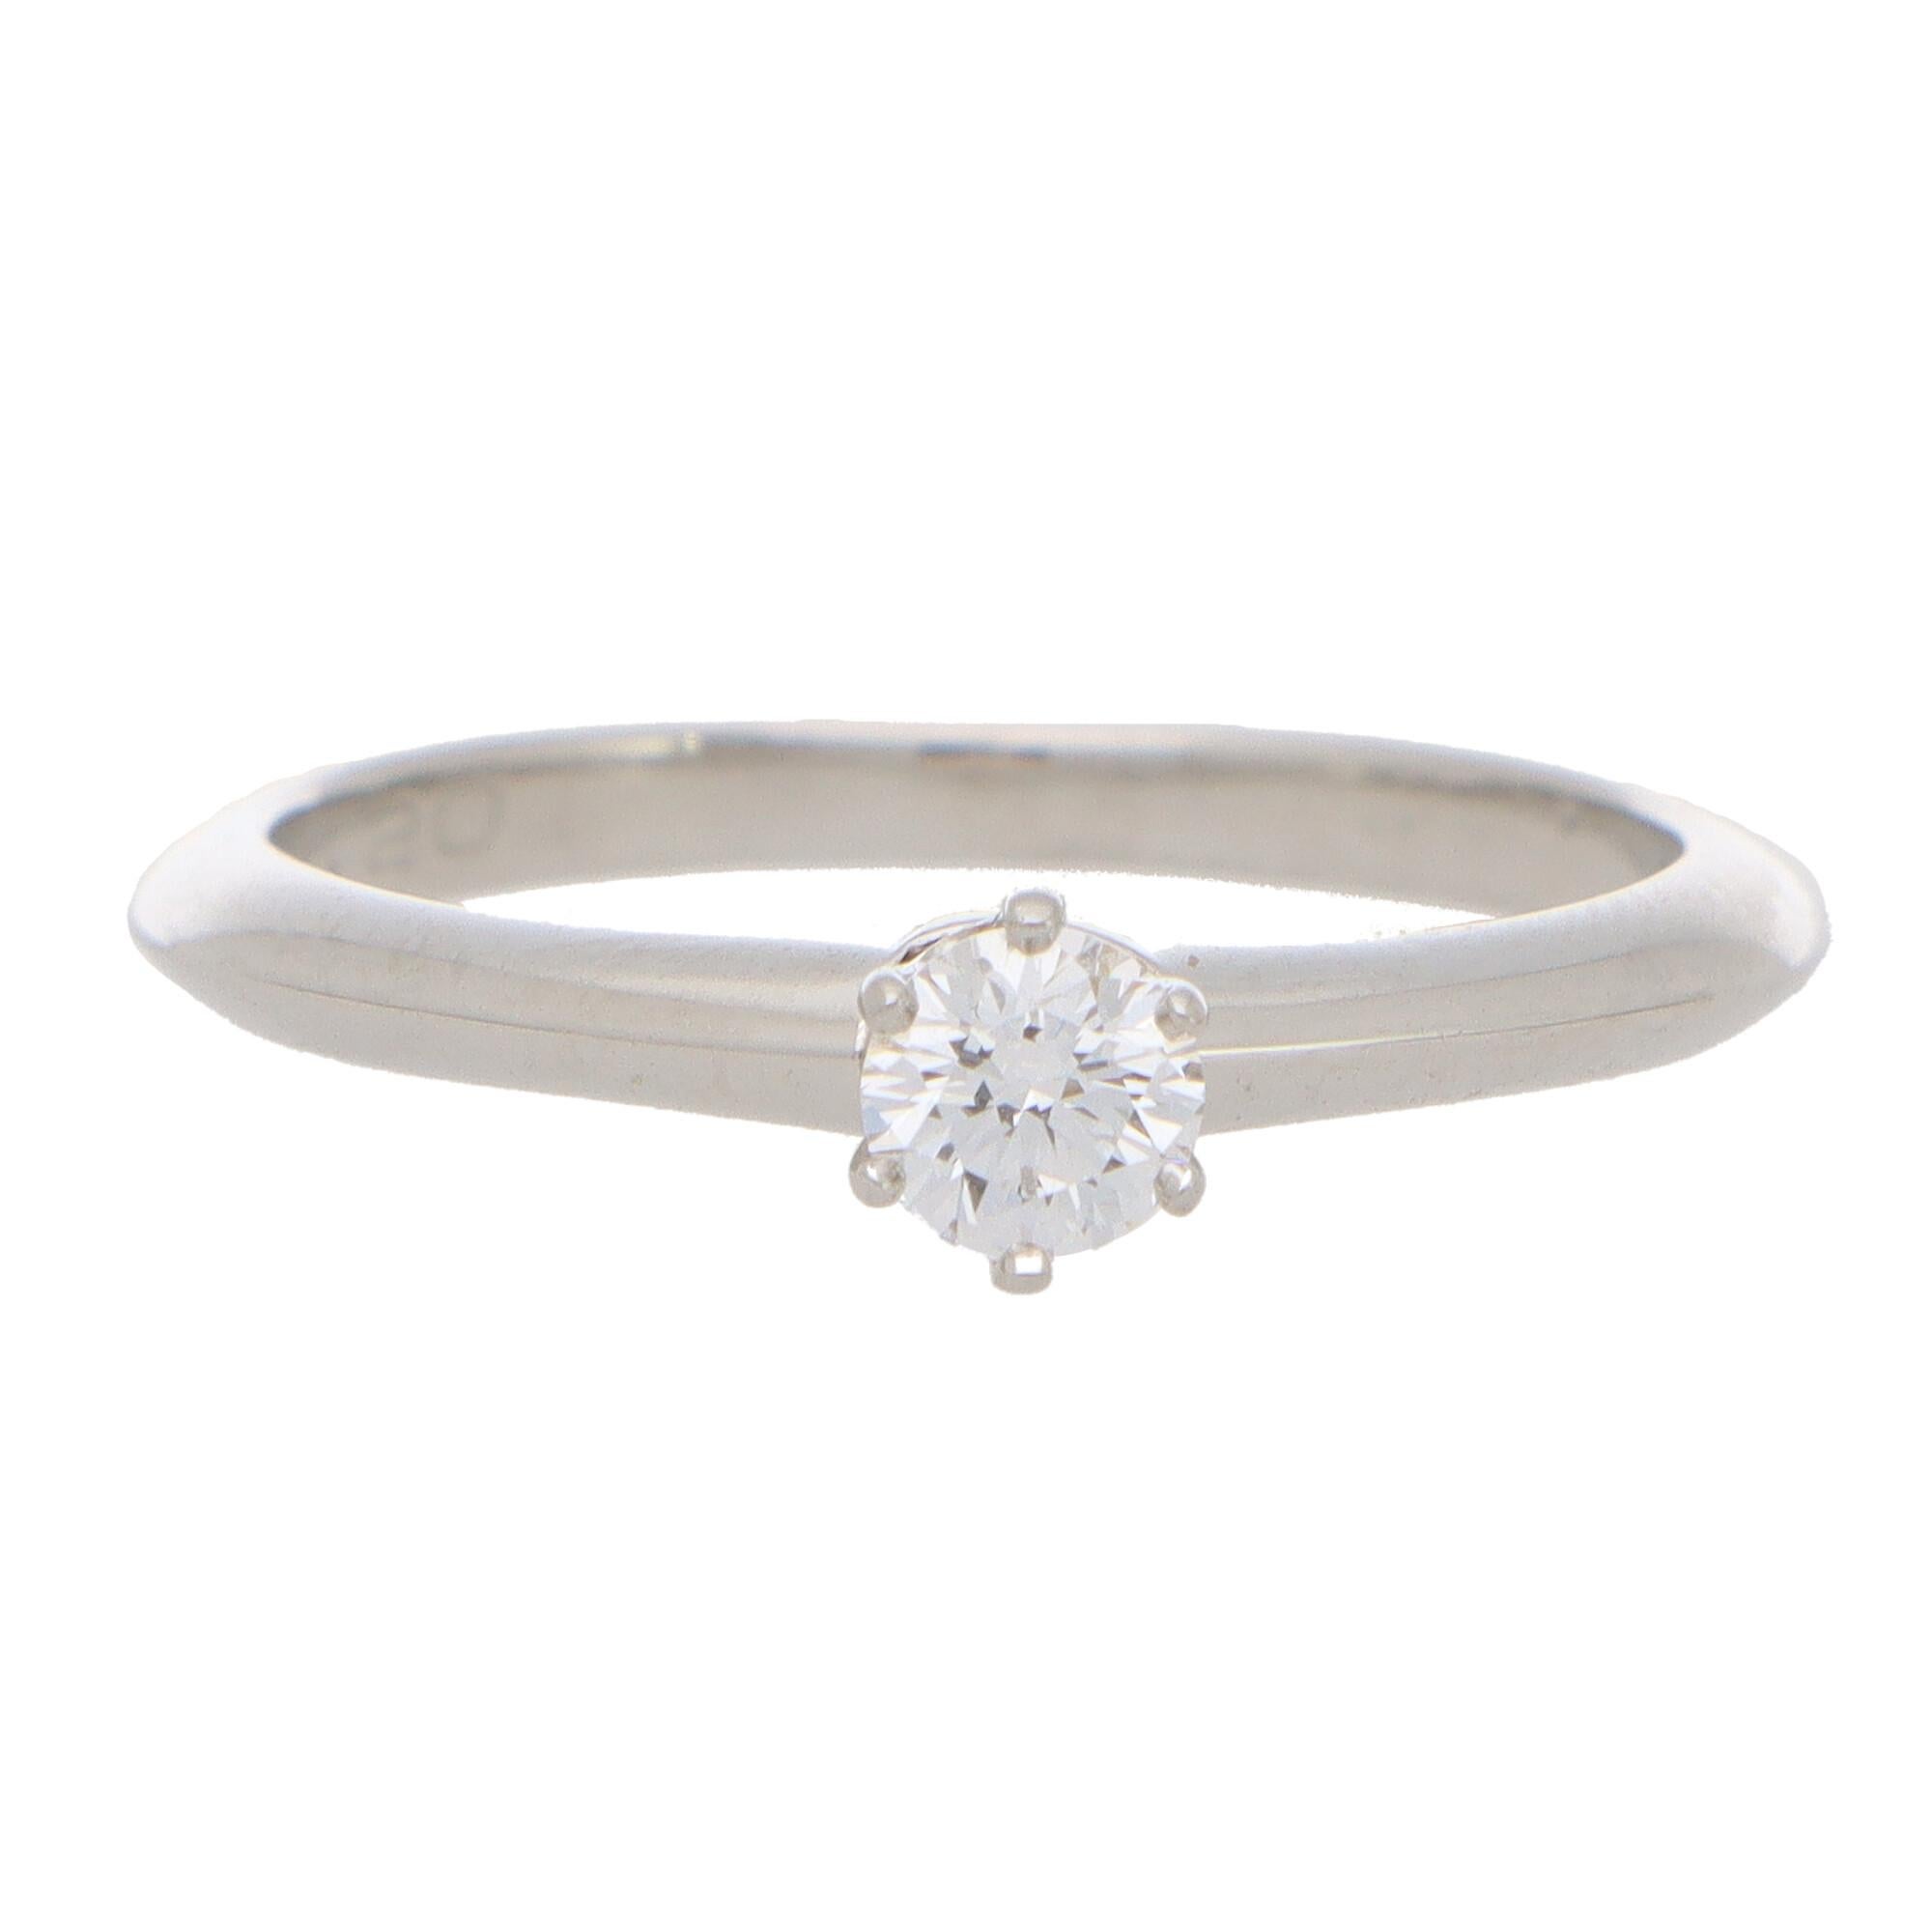 A beautiful vintage Tiffany & Co. round brilliant cut diamond single solitaire ring, set in platinum.

The piece is solely set with a beautiful 0.20 carat round brilliant cut diamond which is six-claw set in a knife edge band mounting.

The beauty